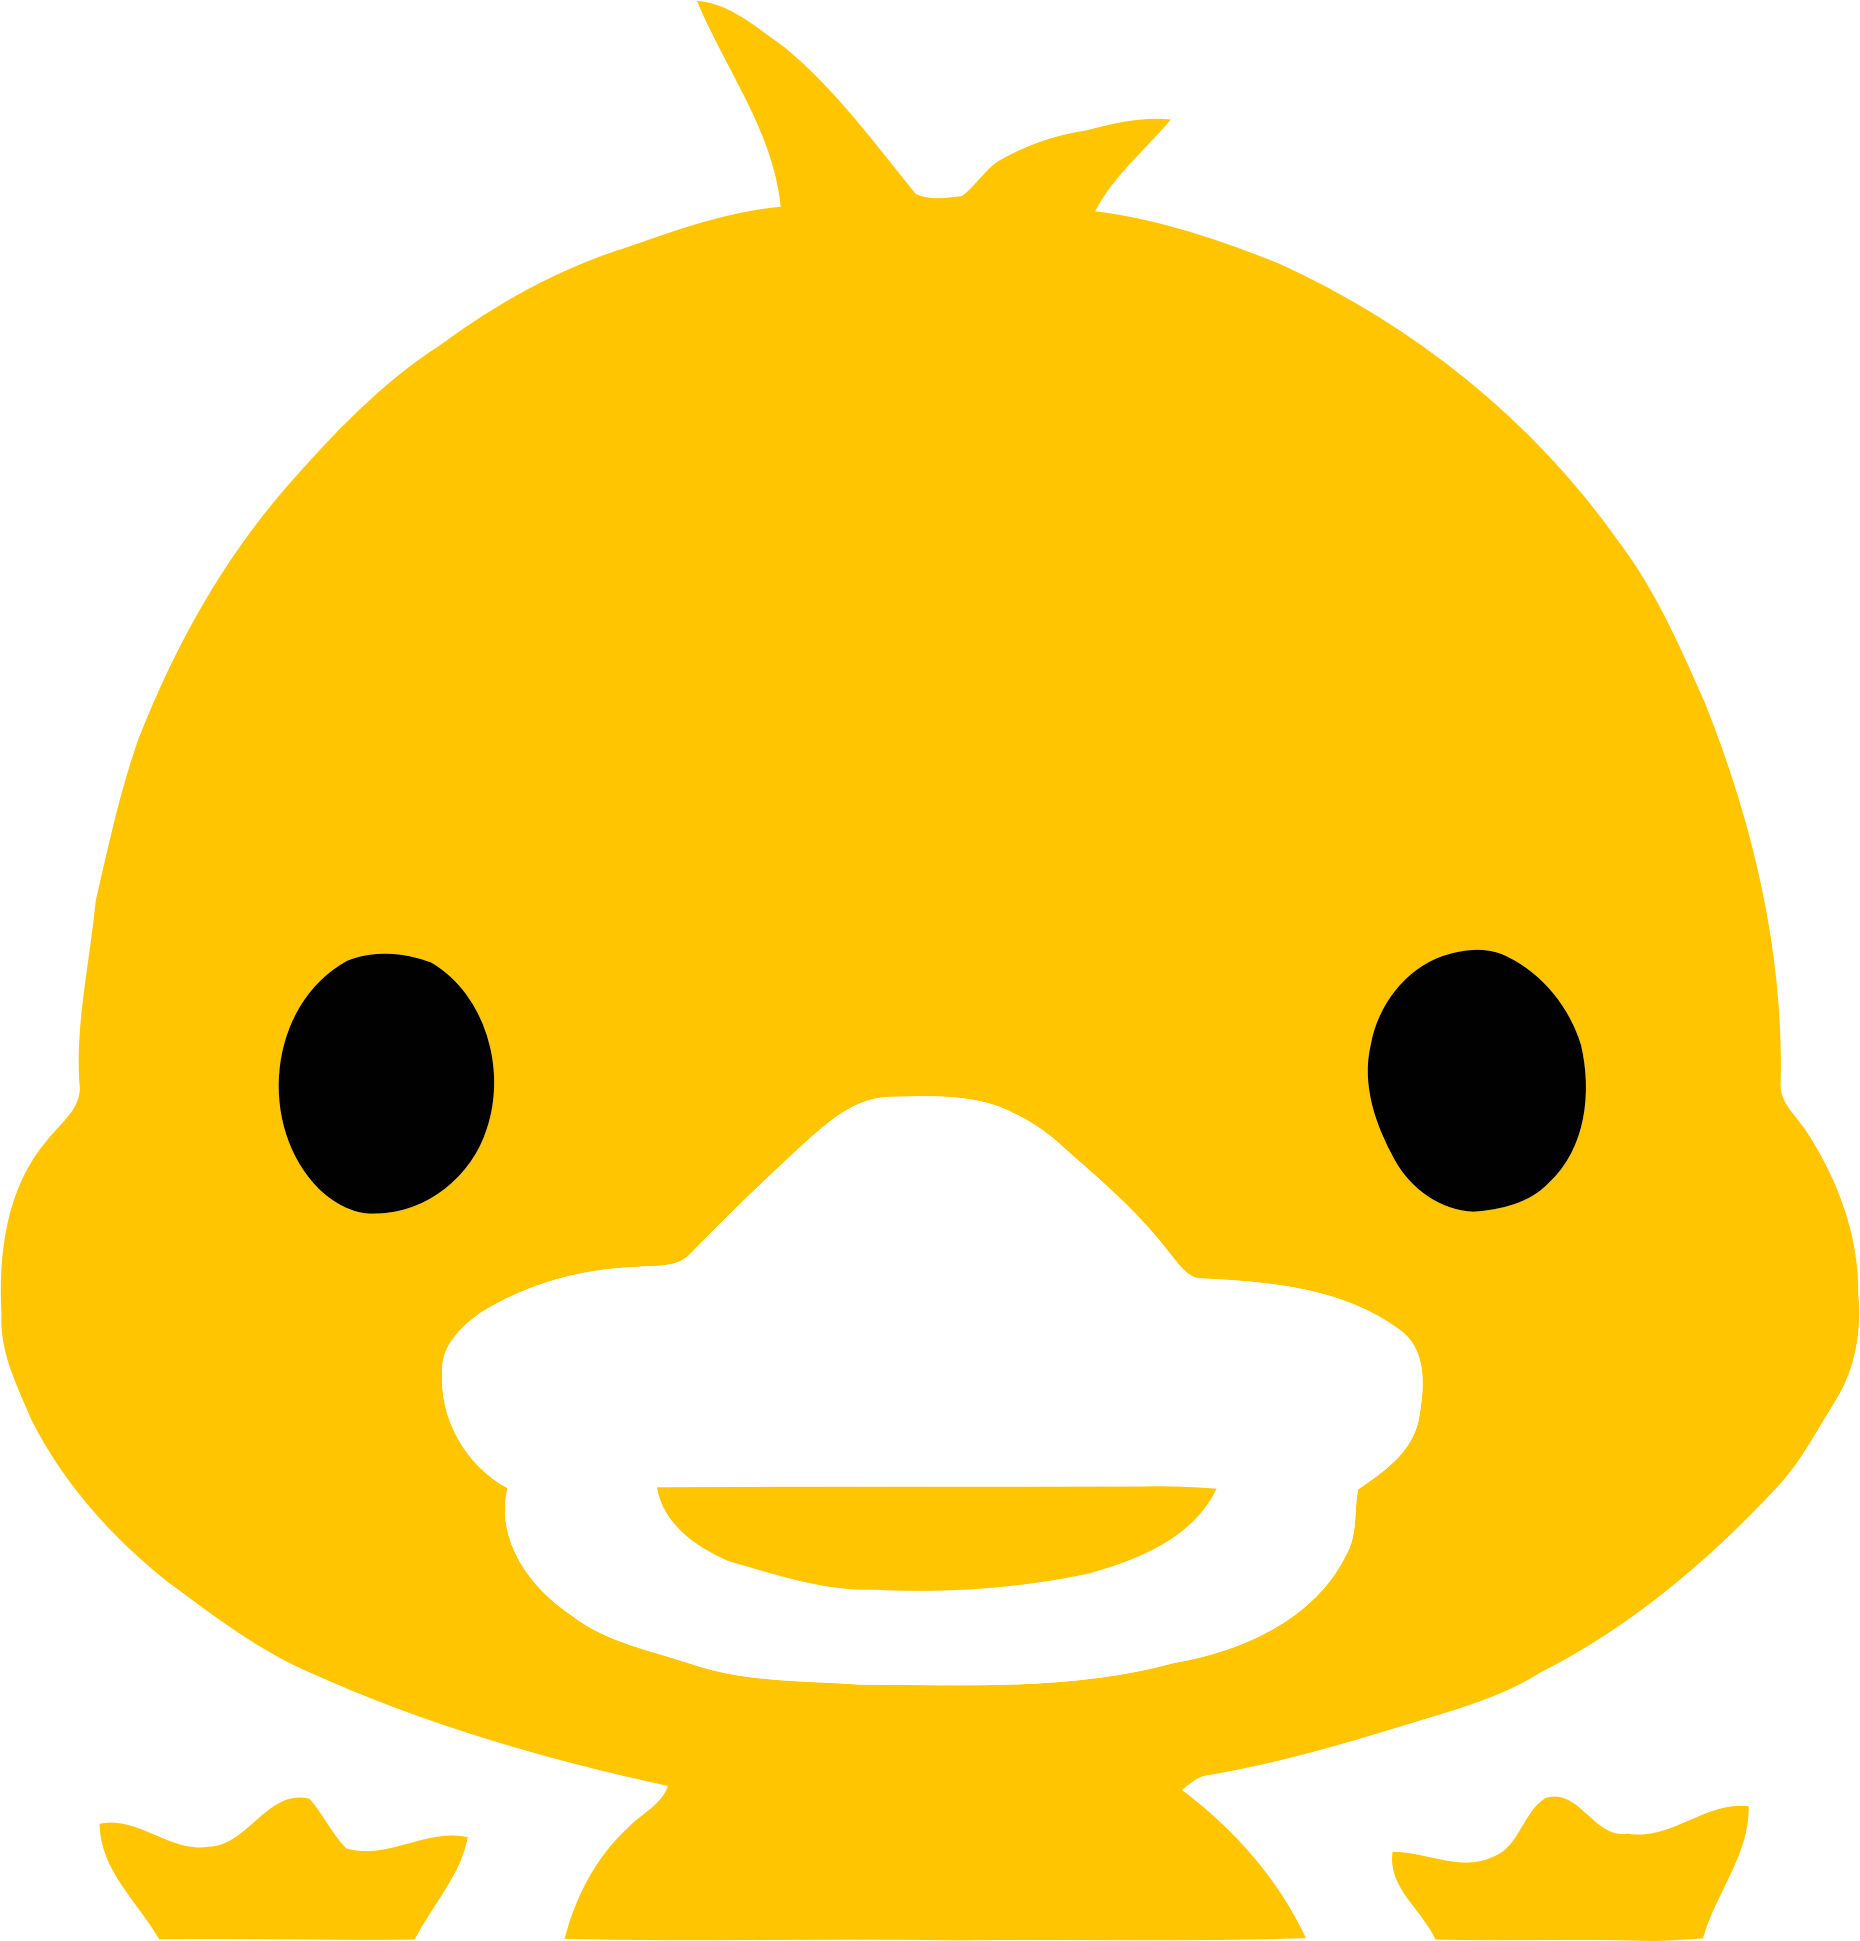 Duckling clipart duck face. Yellow icon icons png